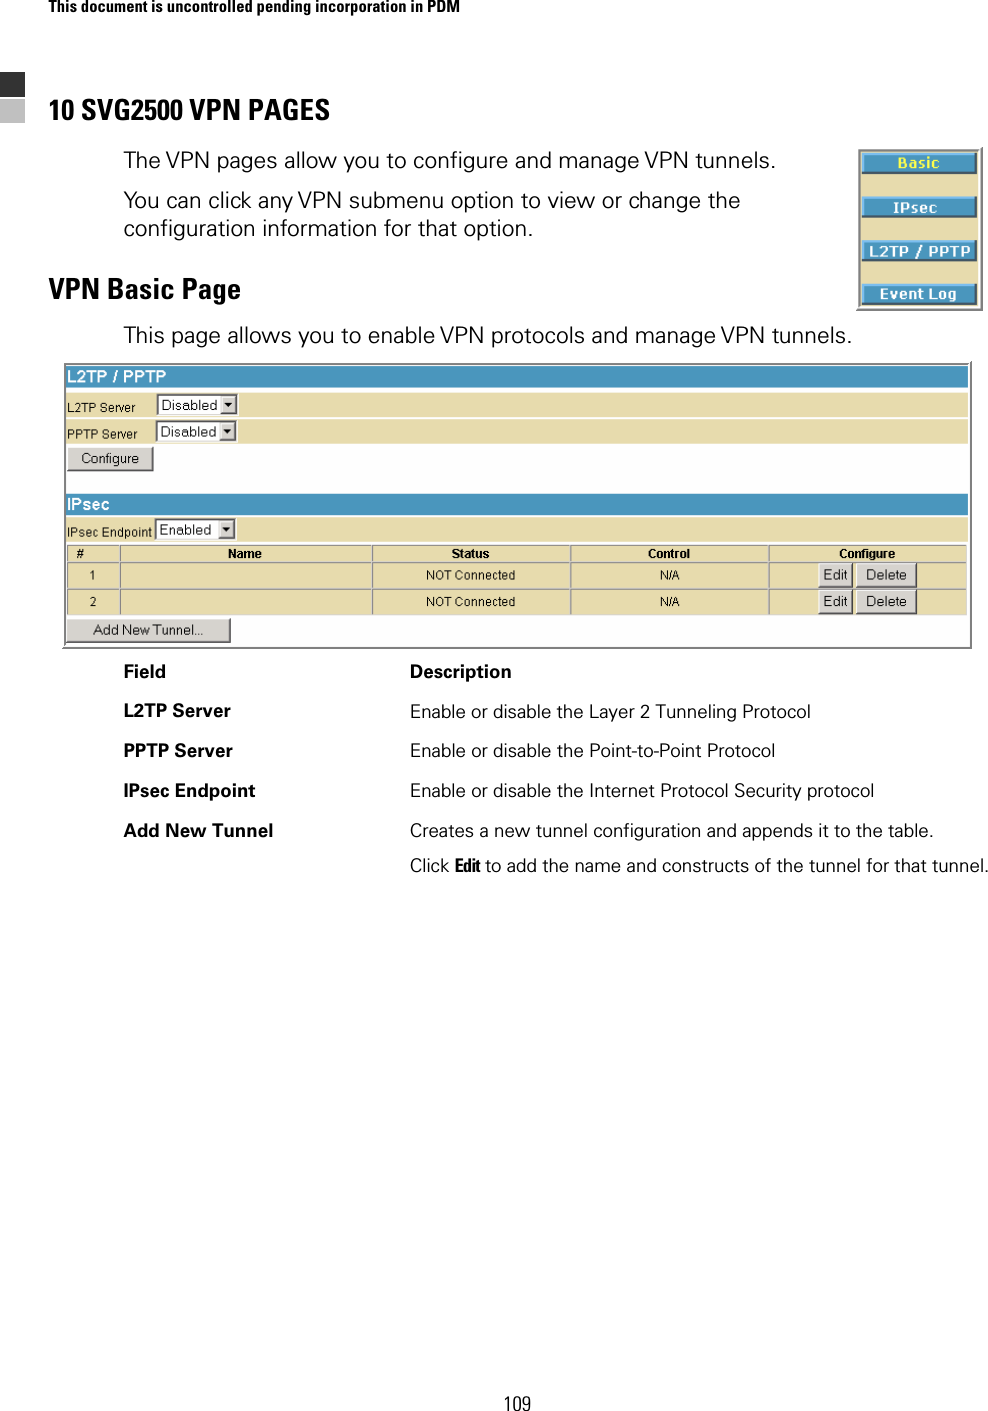 This document is uncontrolled pending incorporation in PDM  109 10 SVG2500 VPN PAGES The VPN pages allow you to configure and manage VPN tunnels.  You can click any VPN submenu option to view or change the configuration information for that option. VPN Basic Page This page allows you to enable VPN protocols and manage VPN tunnels.  Field   Description L2TP Server  Enable or disable the Layer 2 Tunneling Protocol PPTP Server  Enable or disable the Point-to-Point Protocol IPsec Endpoint  Enable or disable the Internet Protocol Security protocol Add New Tunnel  Creates a new tunnel configuration and appends it to the table.  Click Edit to add the name and constructs of the tunnel for that tunnel.  